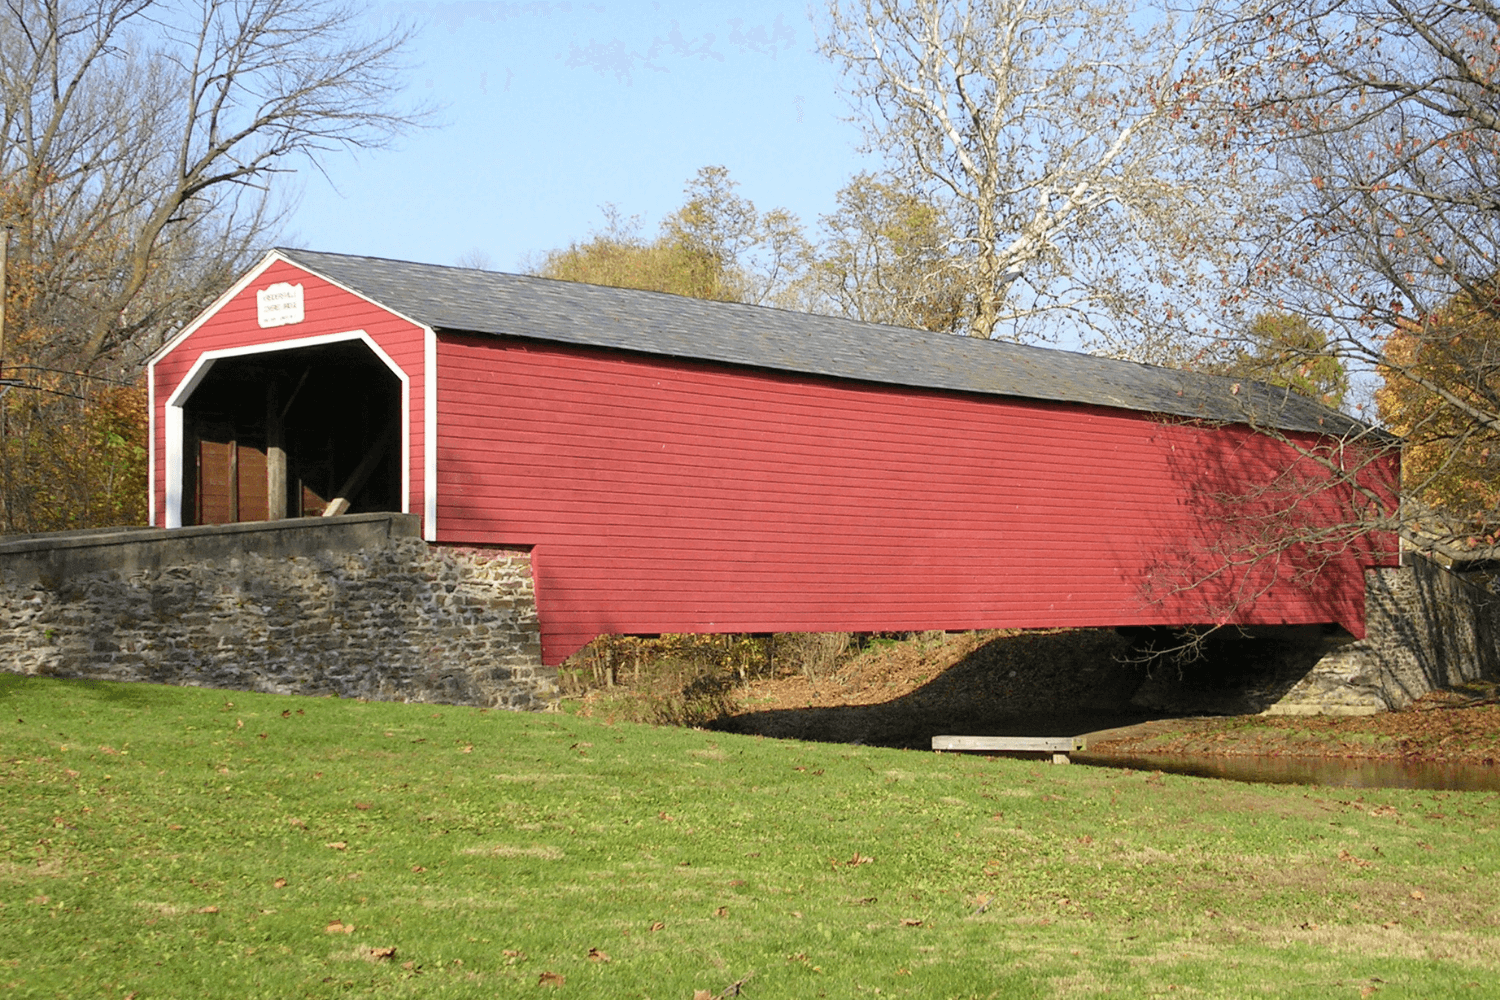 Lehigh Valley Covered Bridge Tour: What You Need To Know